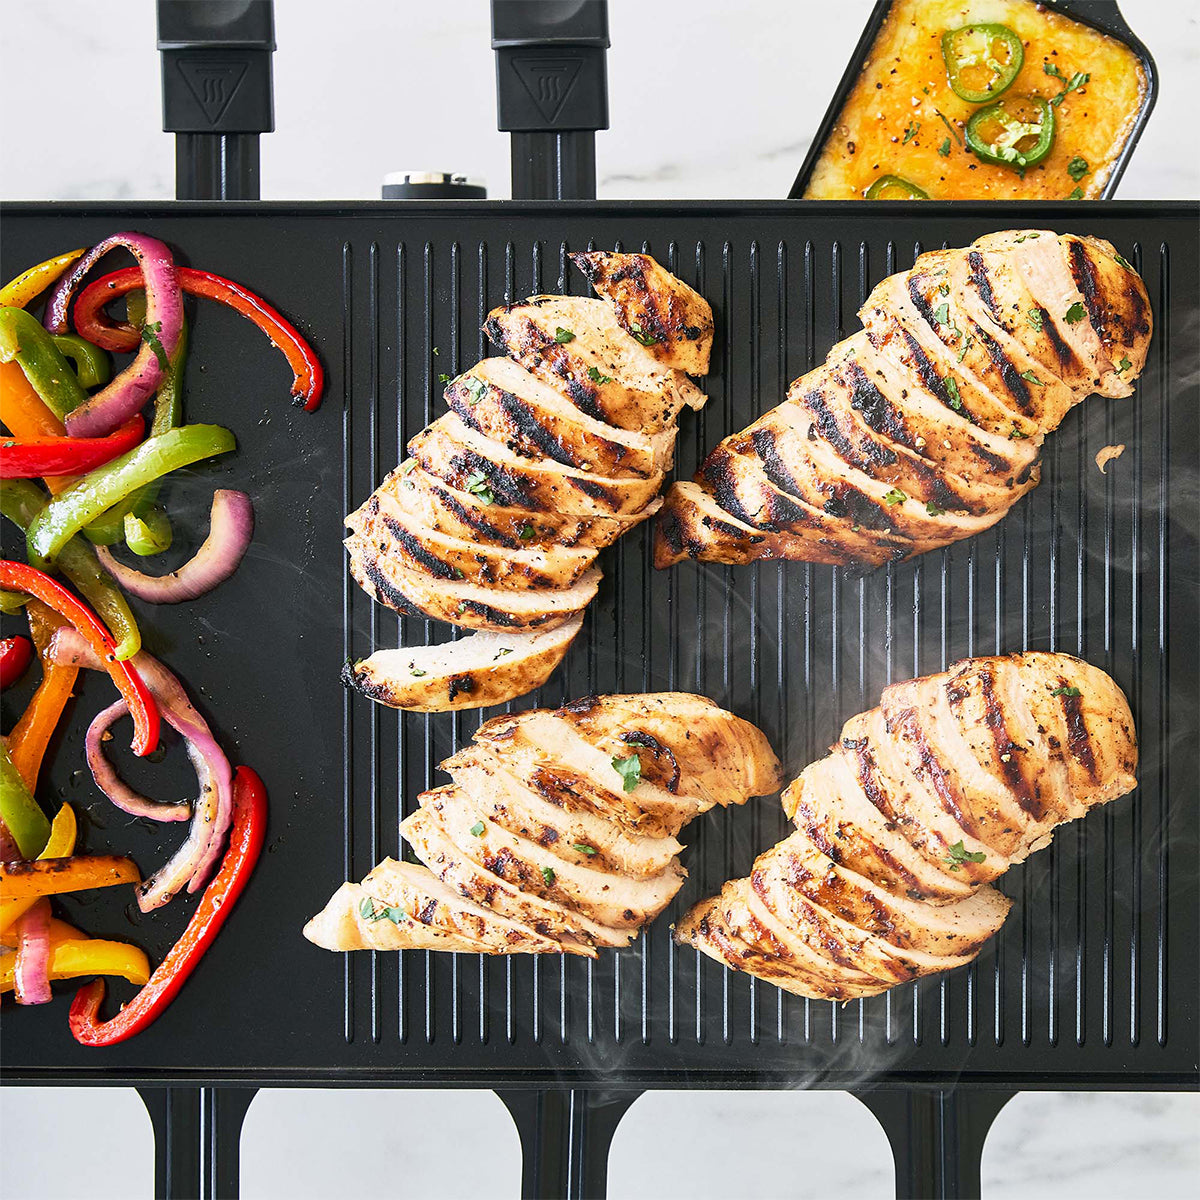 Ceramic Grill Plate, Stovetop Grill Pan